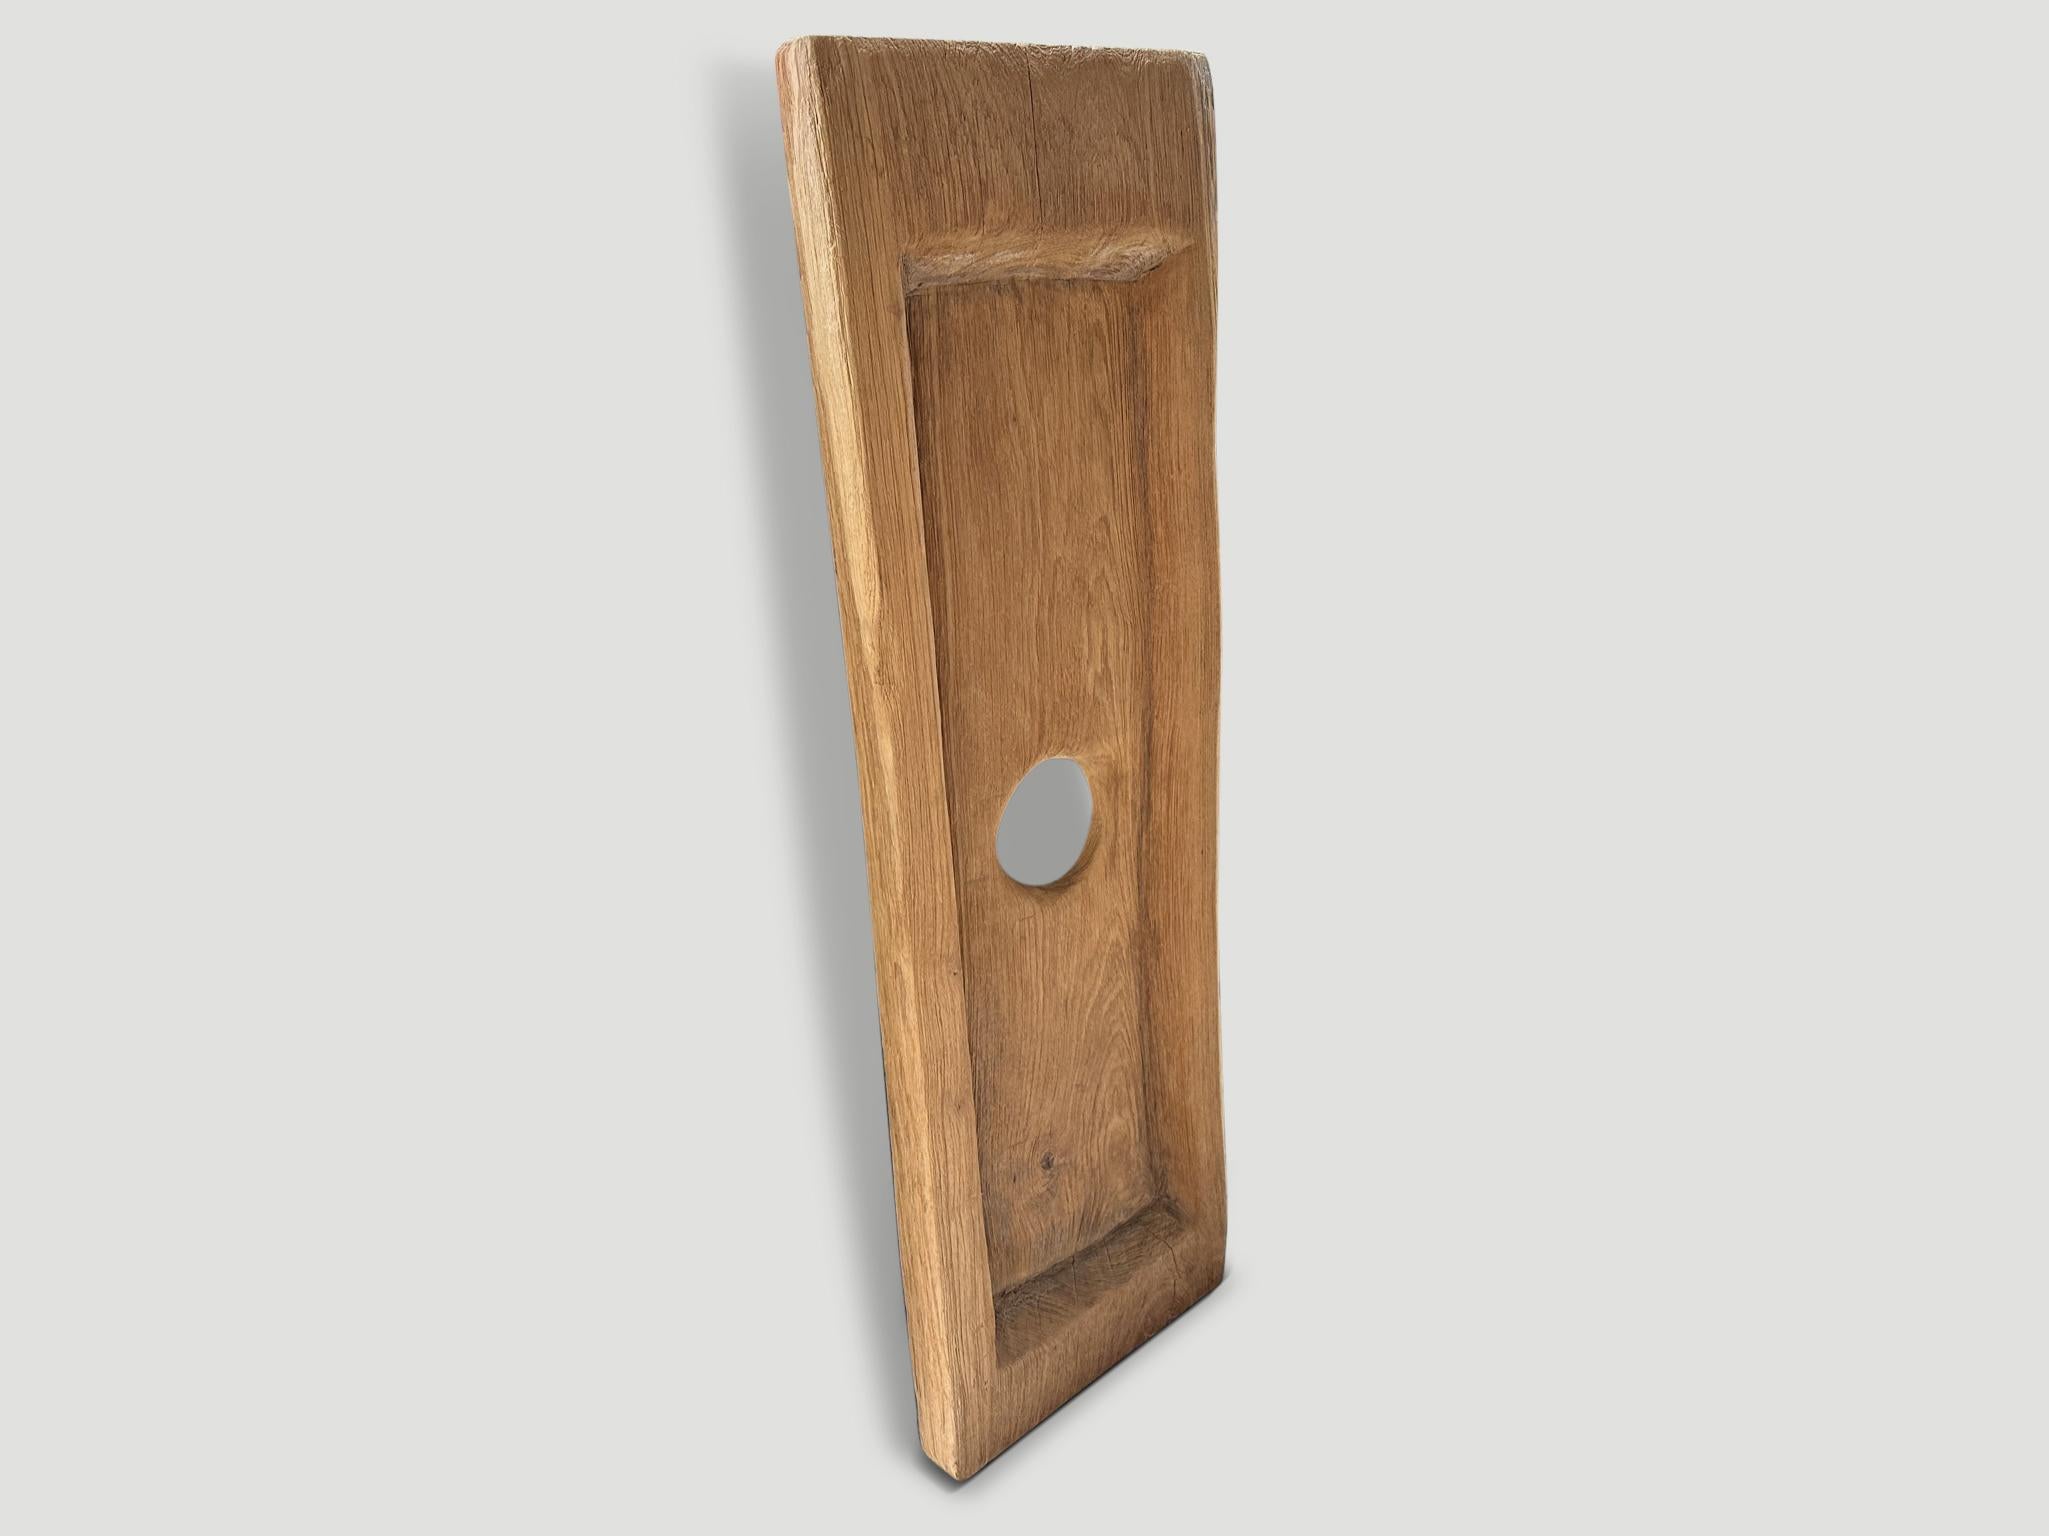 A single three inch thick old teak slab is hand carved into this minimalist wall hanging or tray. This can also be used as a console or coffee table top. Both usable and a piece of art.

This beautiful old teak panel was hand made in the spirit of